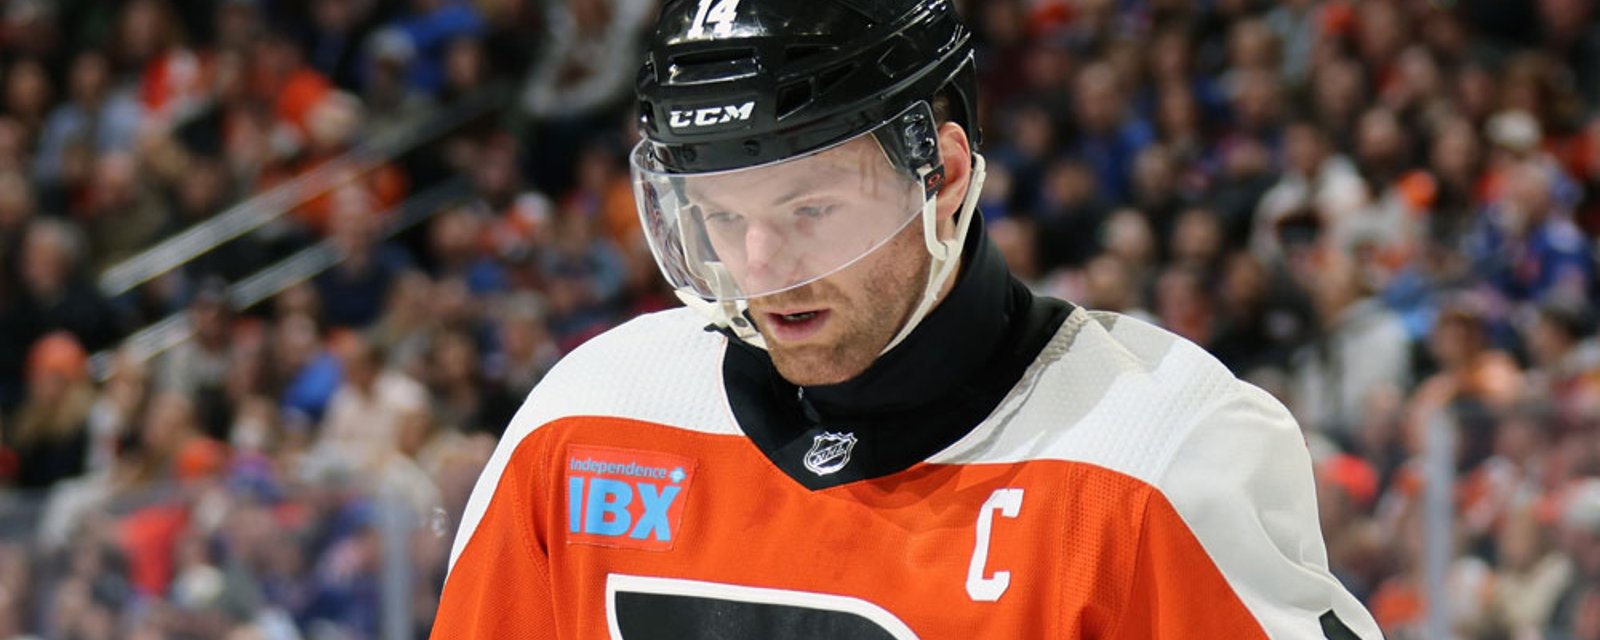 Reports that Couturier is done with the Flyers